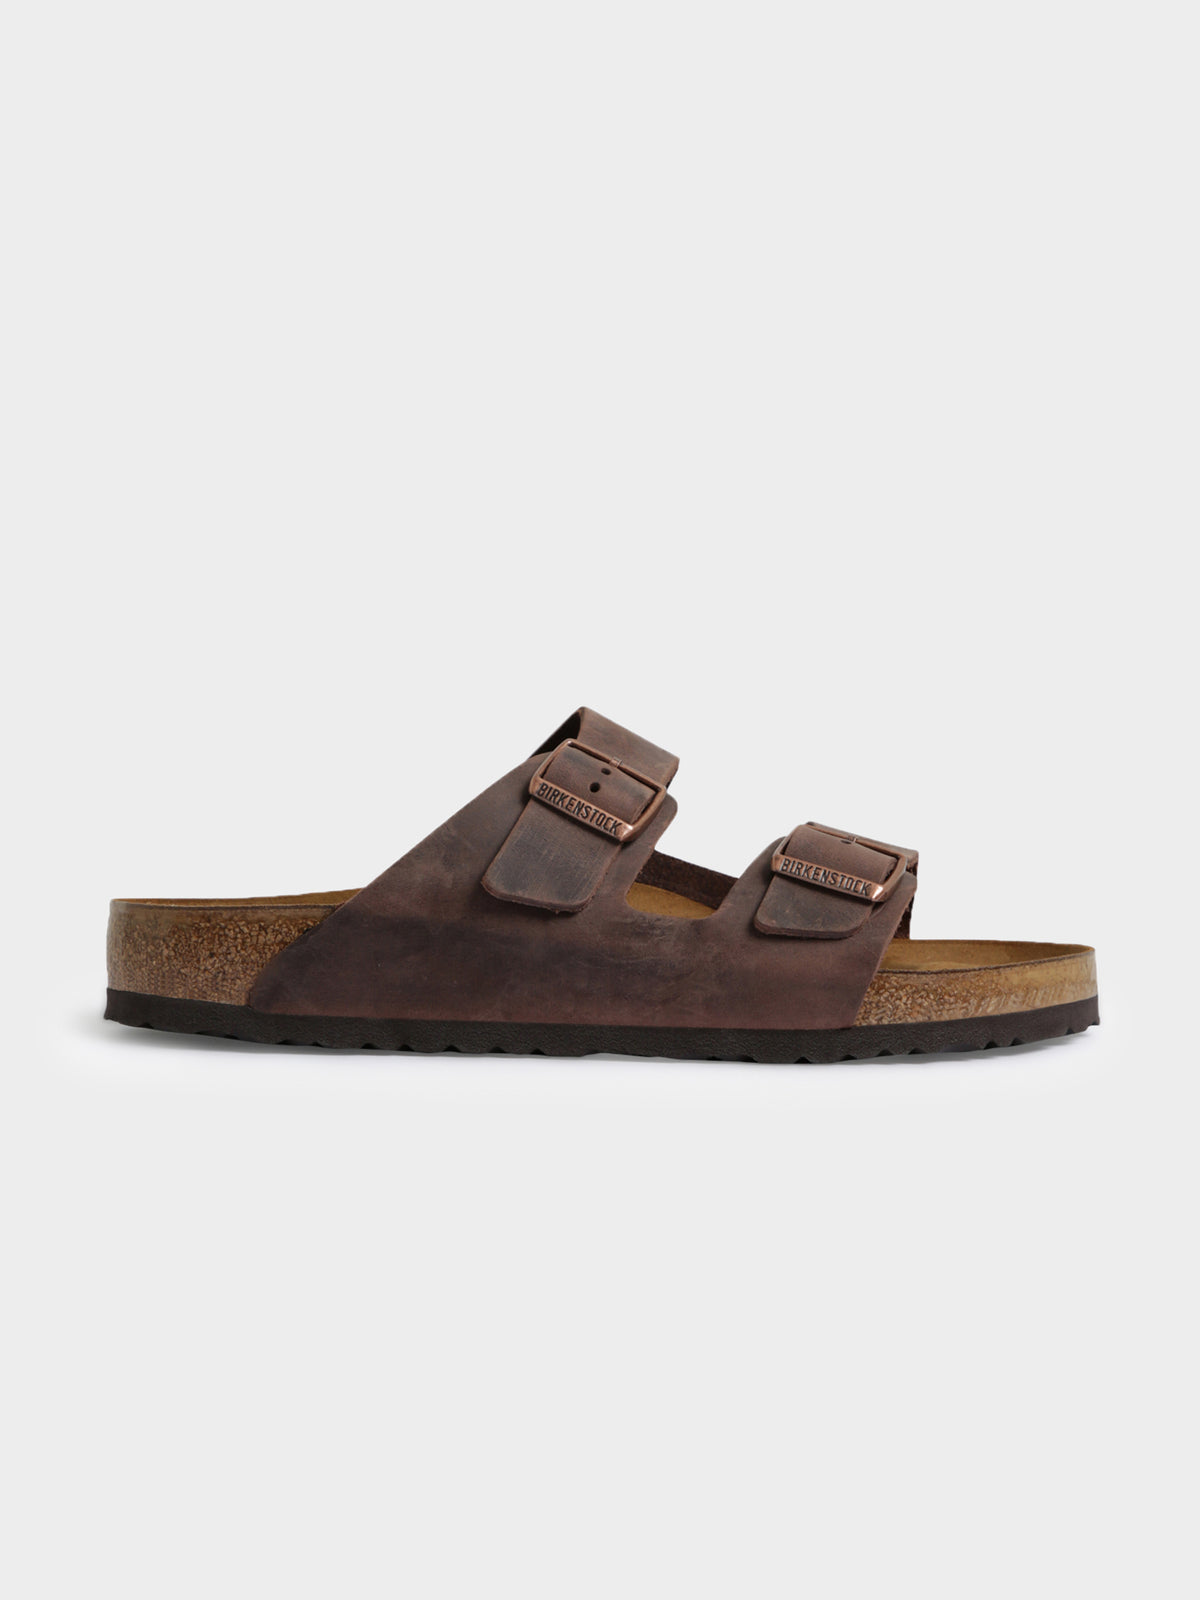 Unisex Arizona Two-Strap Regular Width Sandals in Habana Brown Oiled Leather